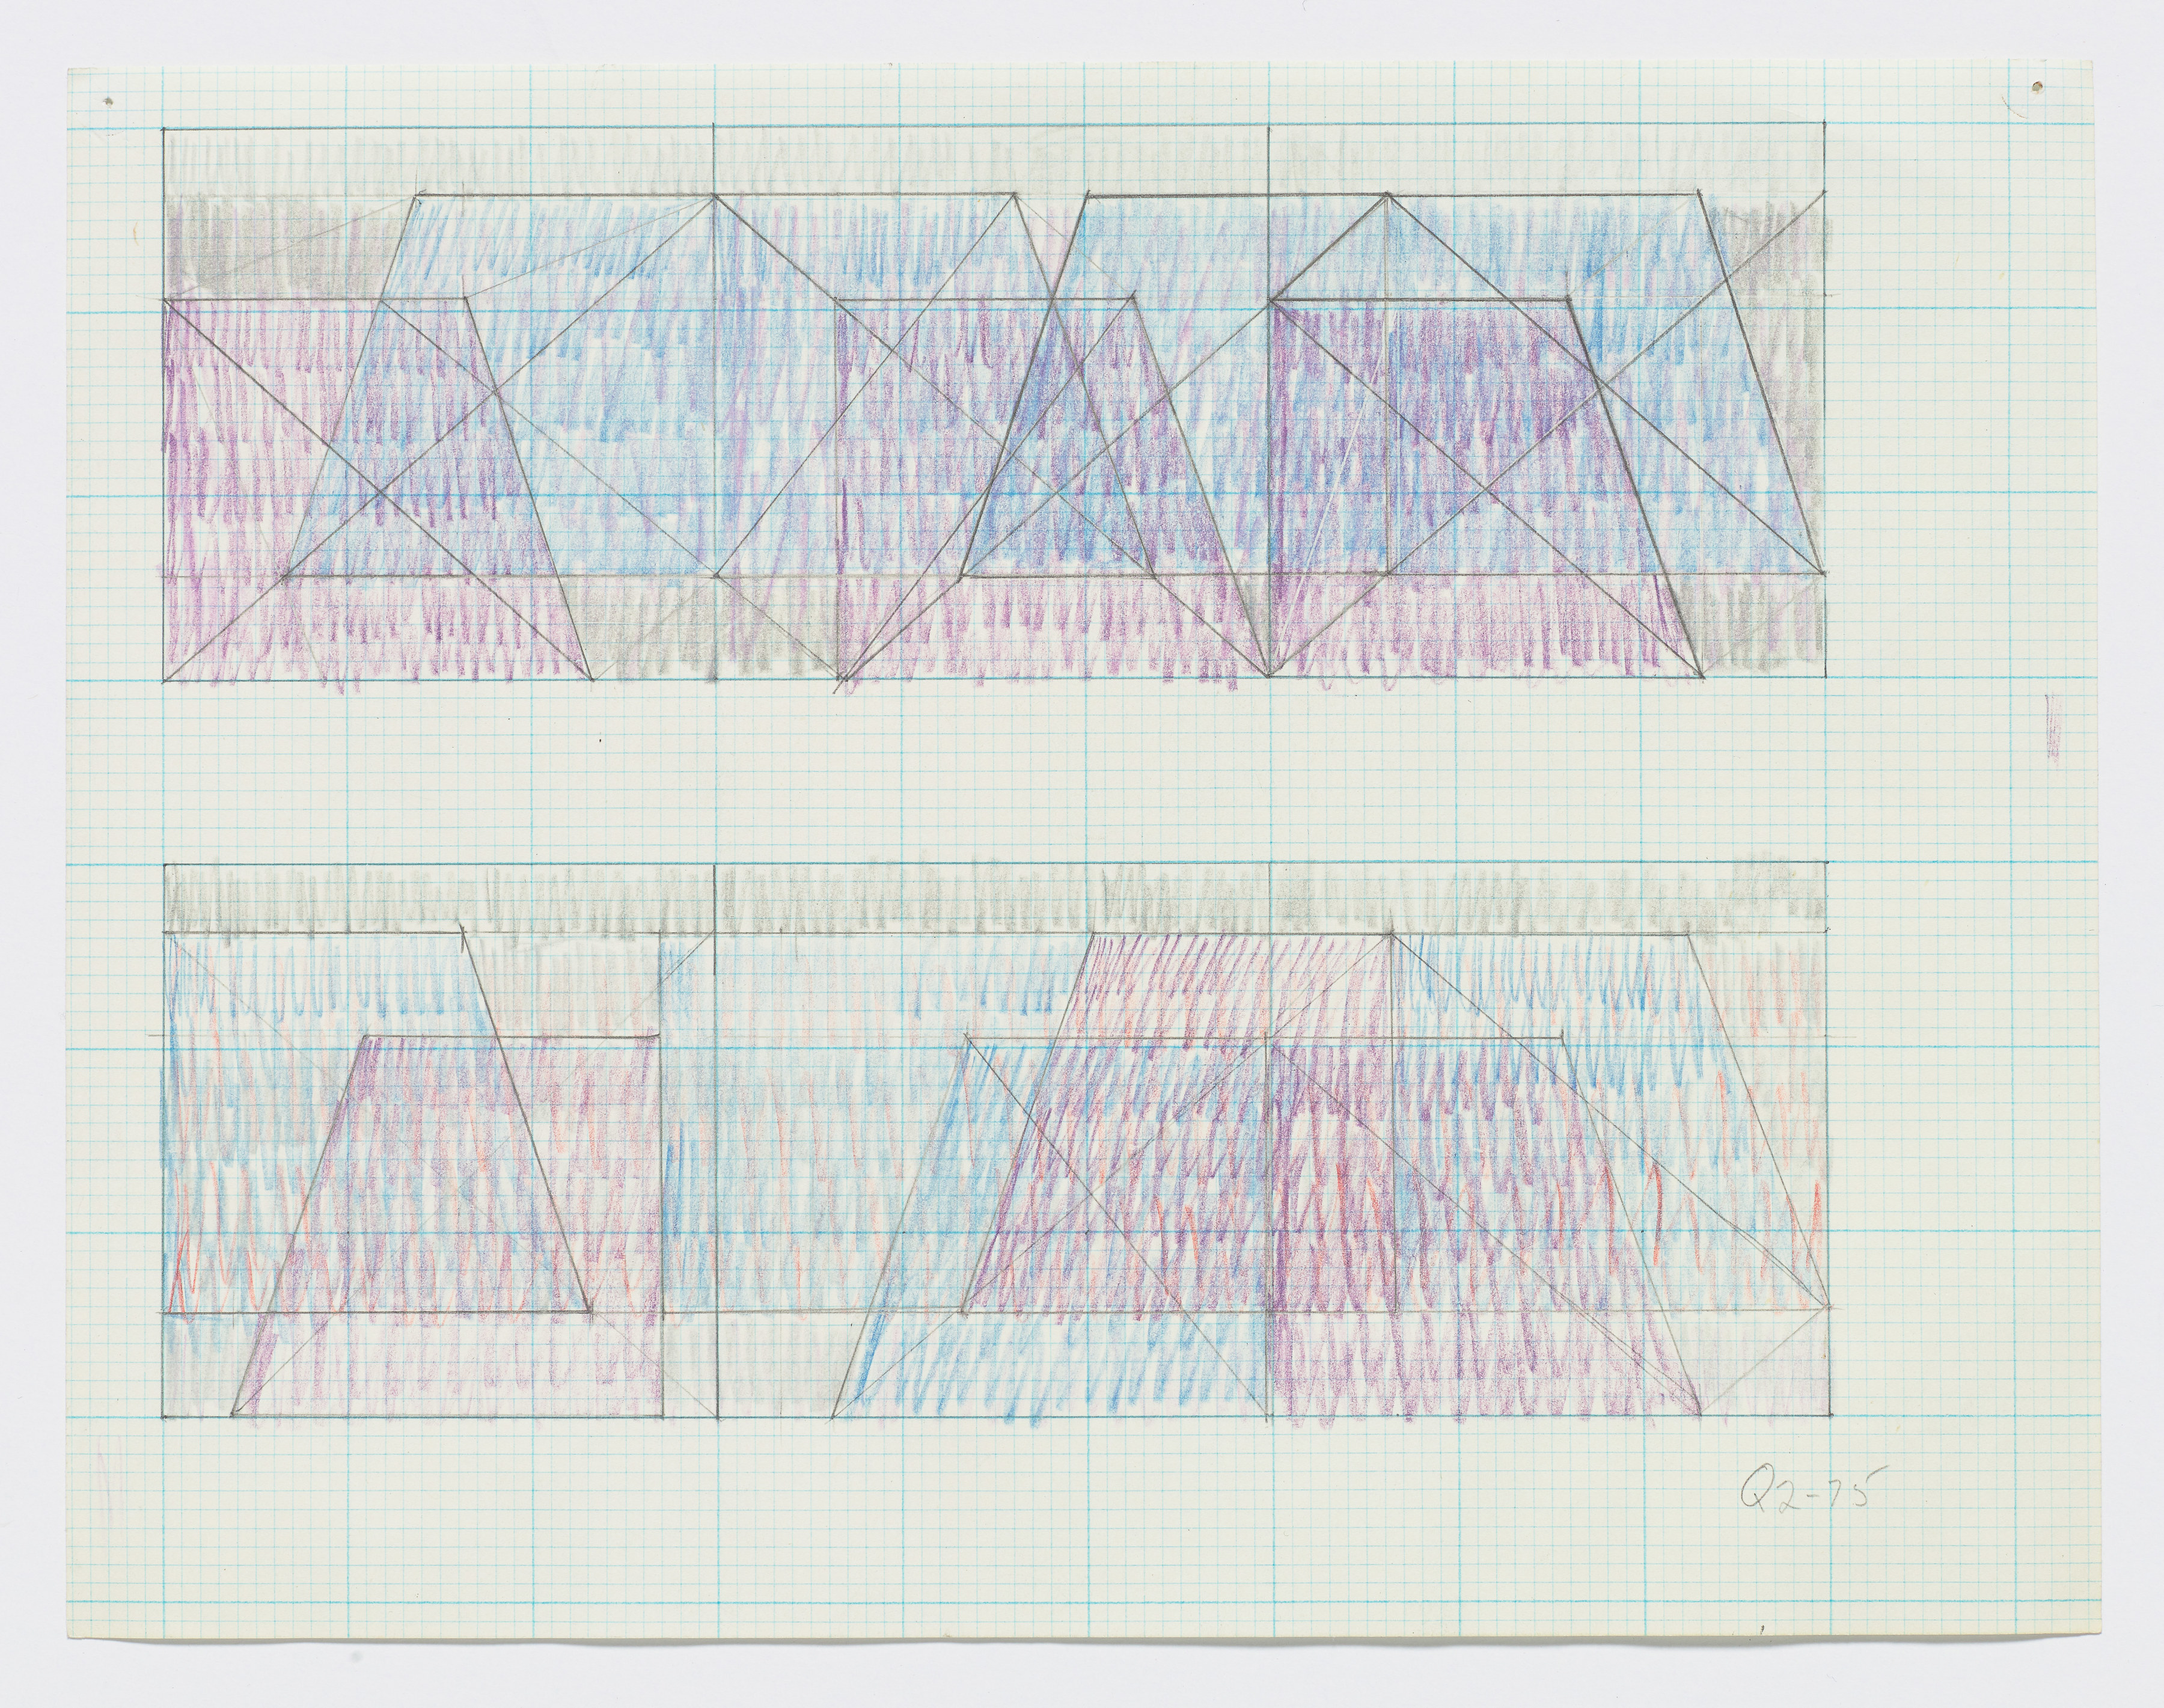 Jack Tworkov, Q2-75 (Two sketches for &quot;Triptych&quot;), c. 1975